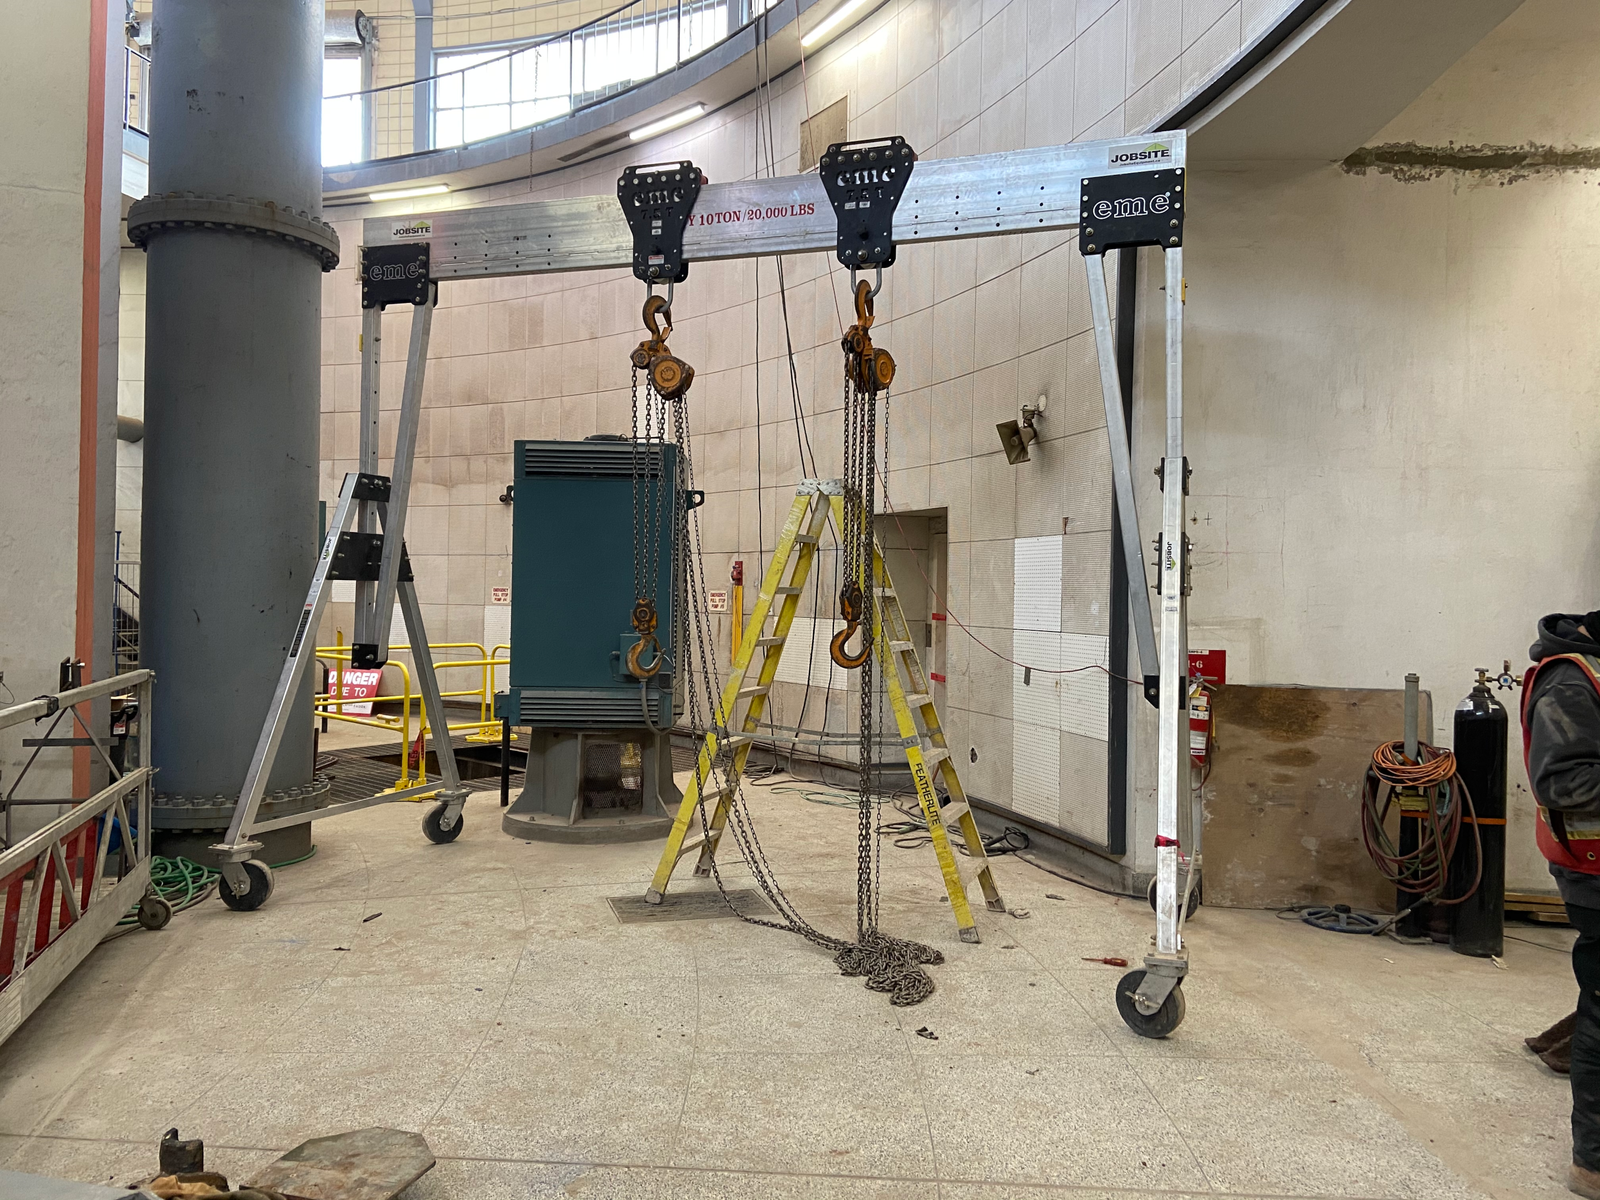 A 10 ton portable aluminum crane being used for a subterranean lift with two chain hoists